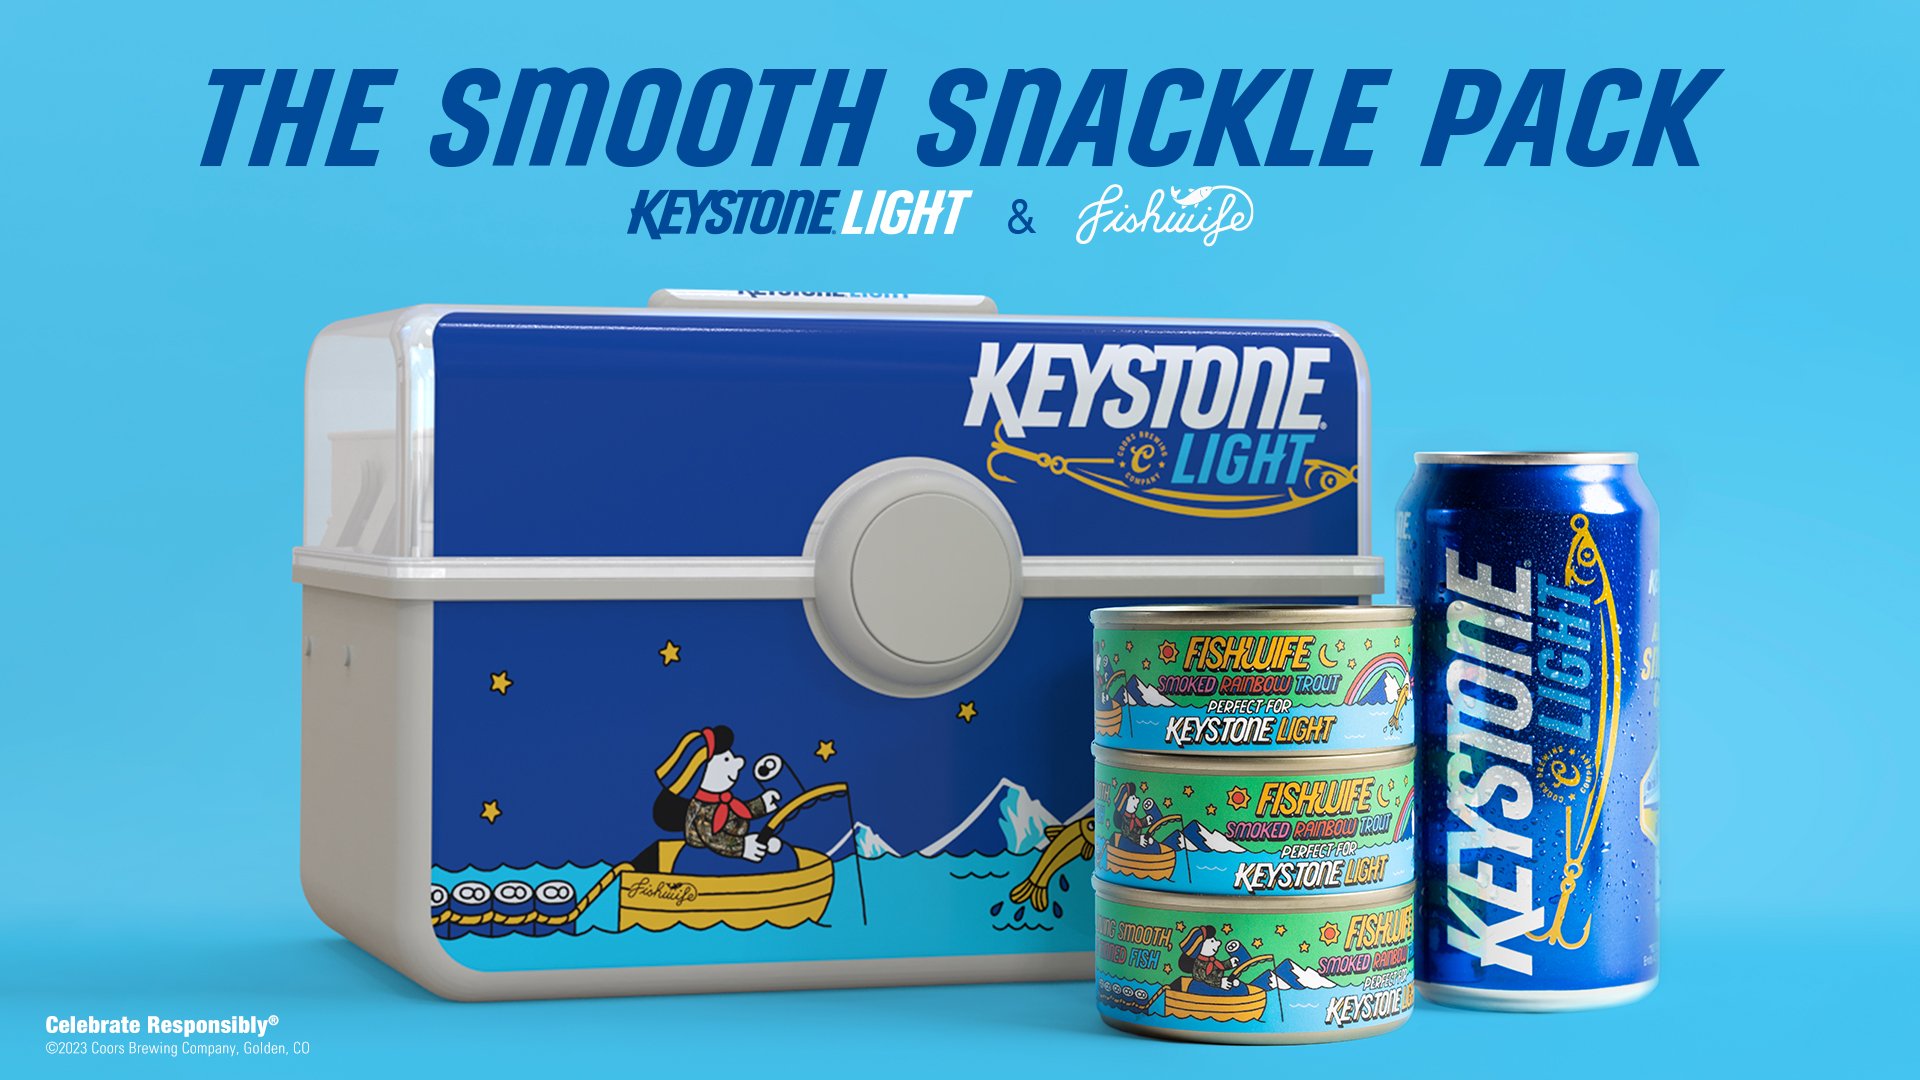 Smooth Snackle Pack by Fishwife and Keystone Light